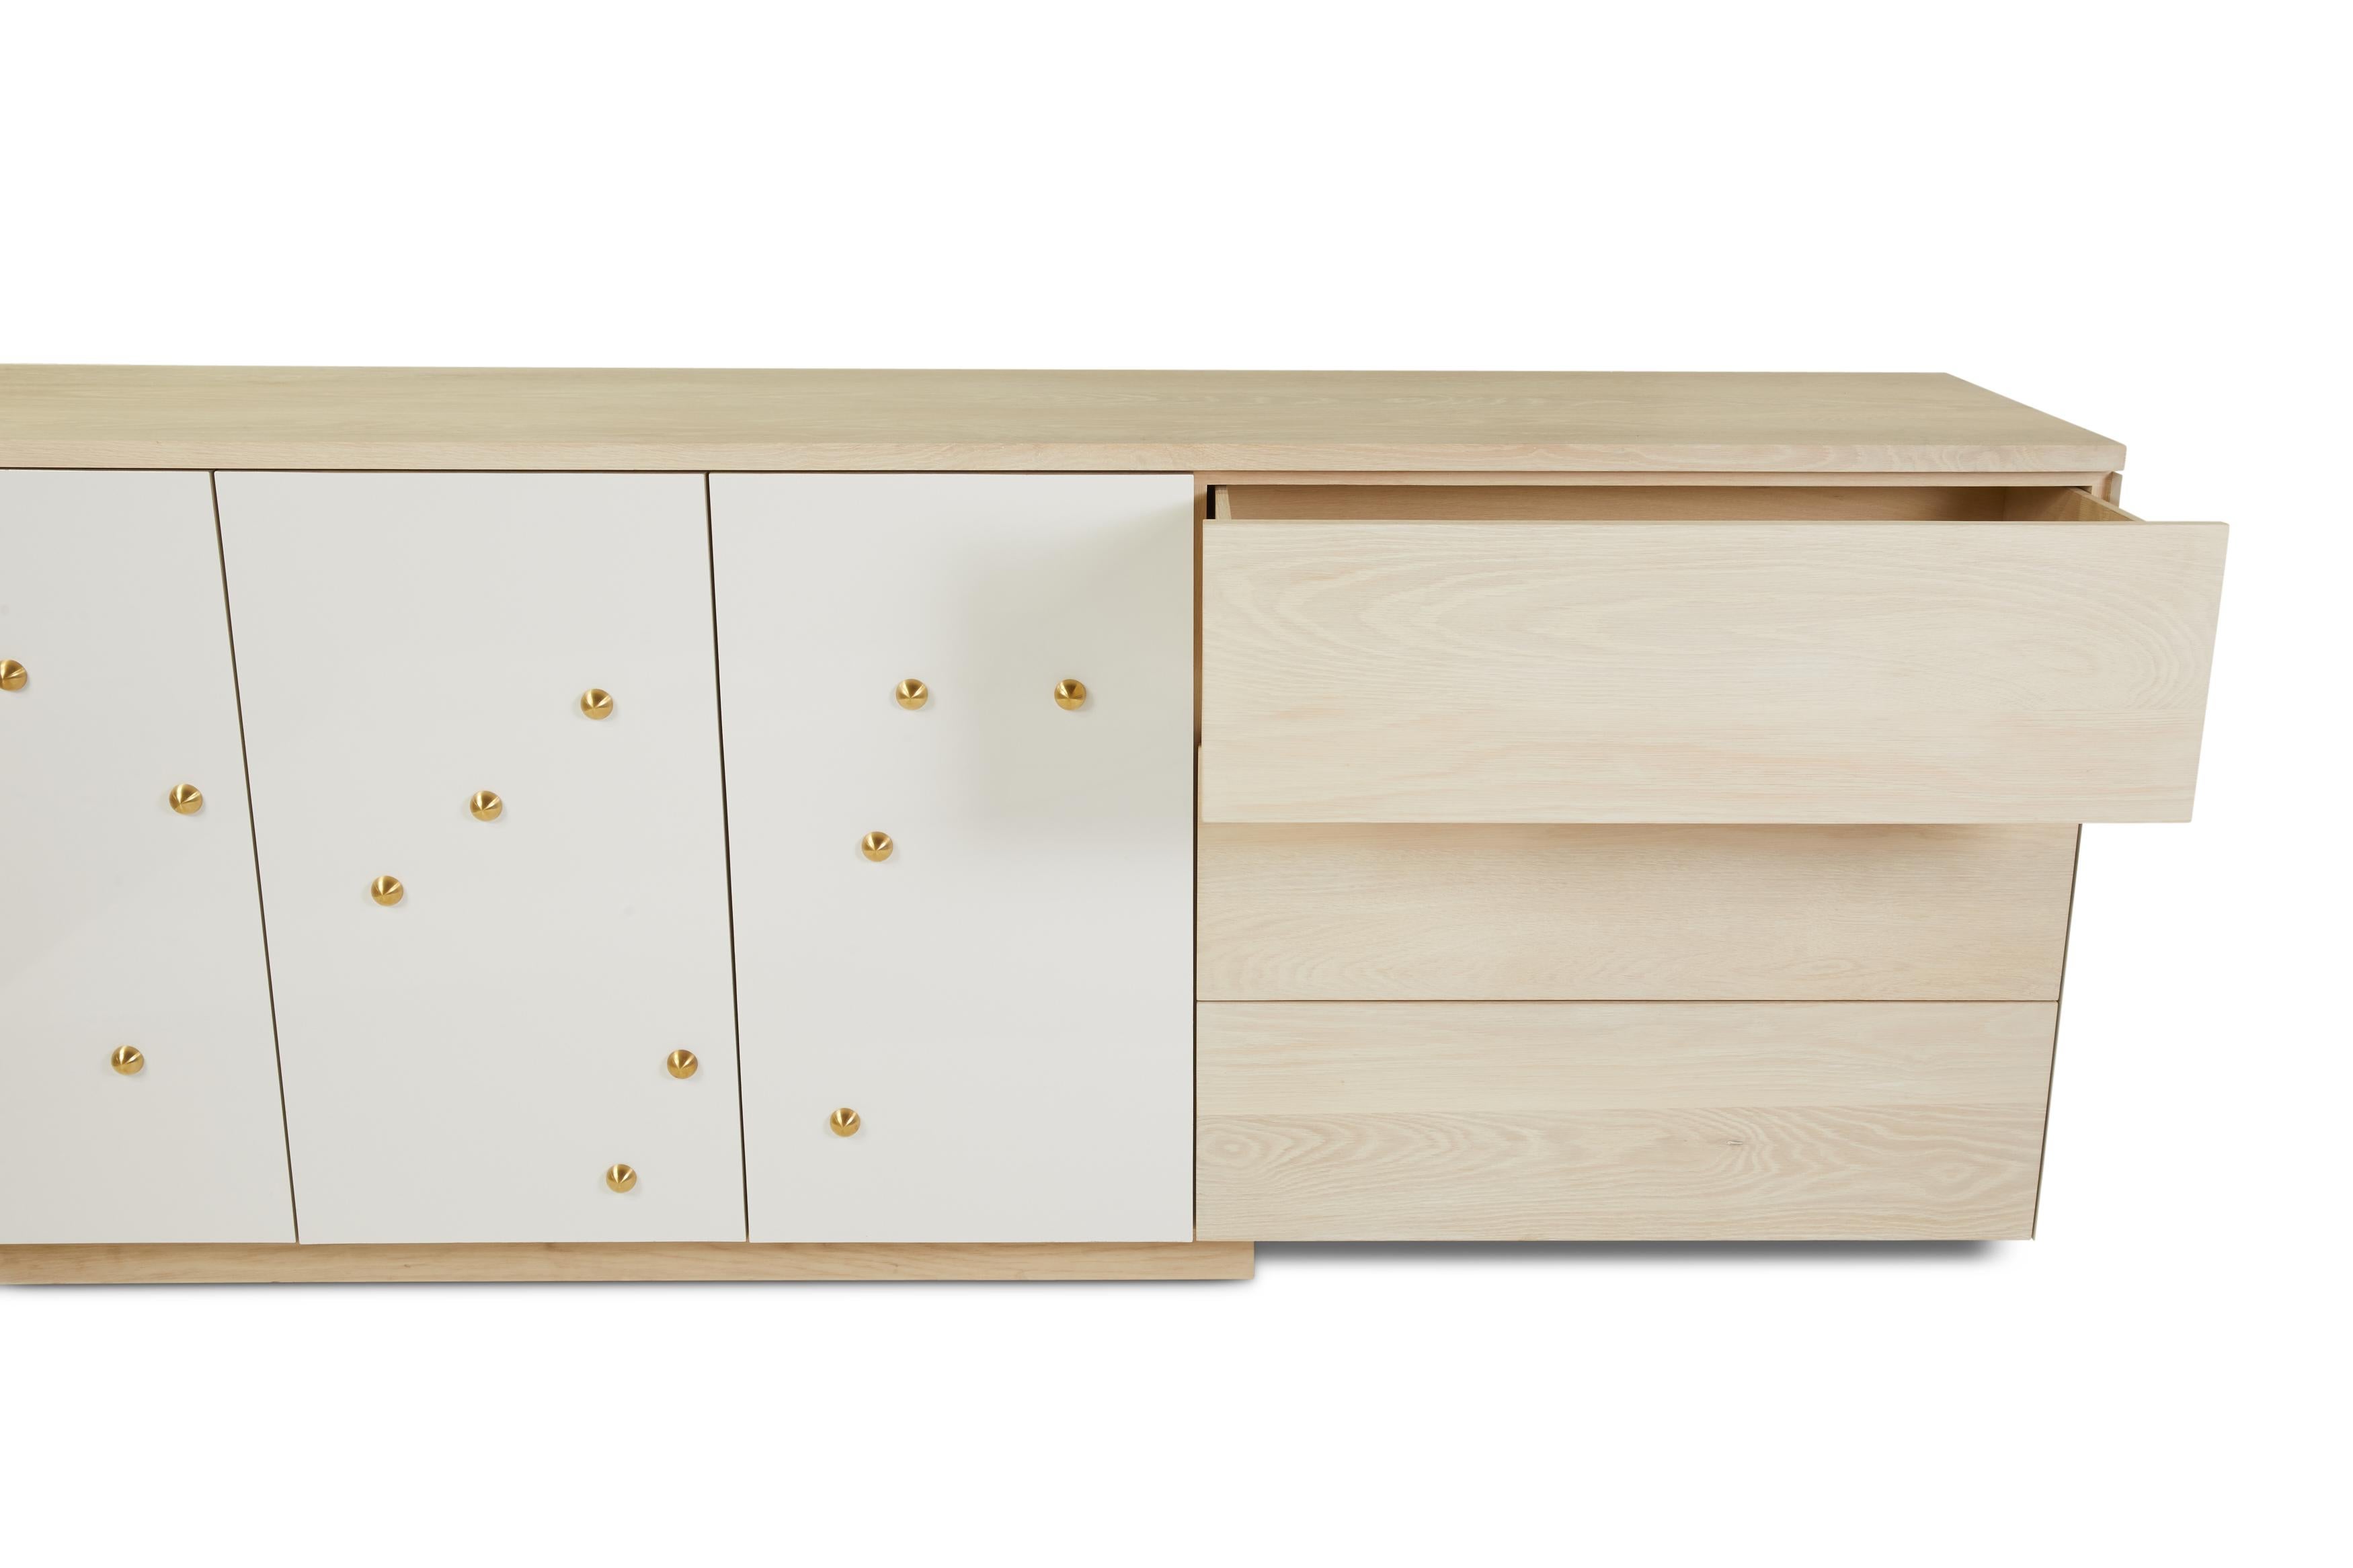 C-210WB Solid White Oak and Powder-Coated Cantilevered Credenza with Brass Knobs For Sale 6